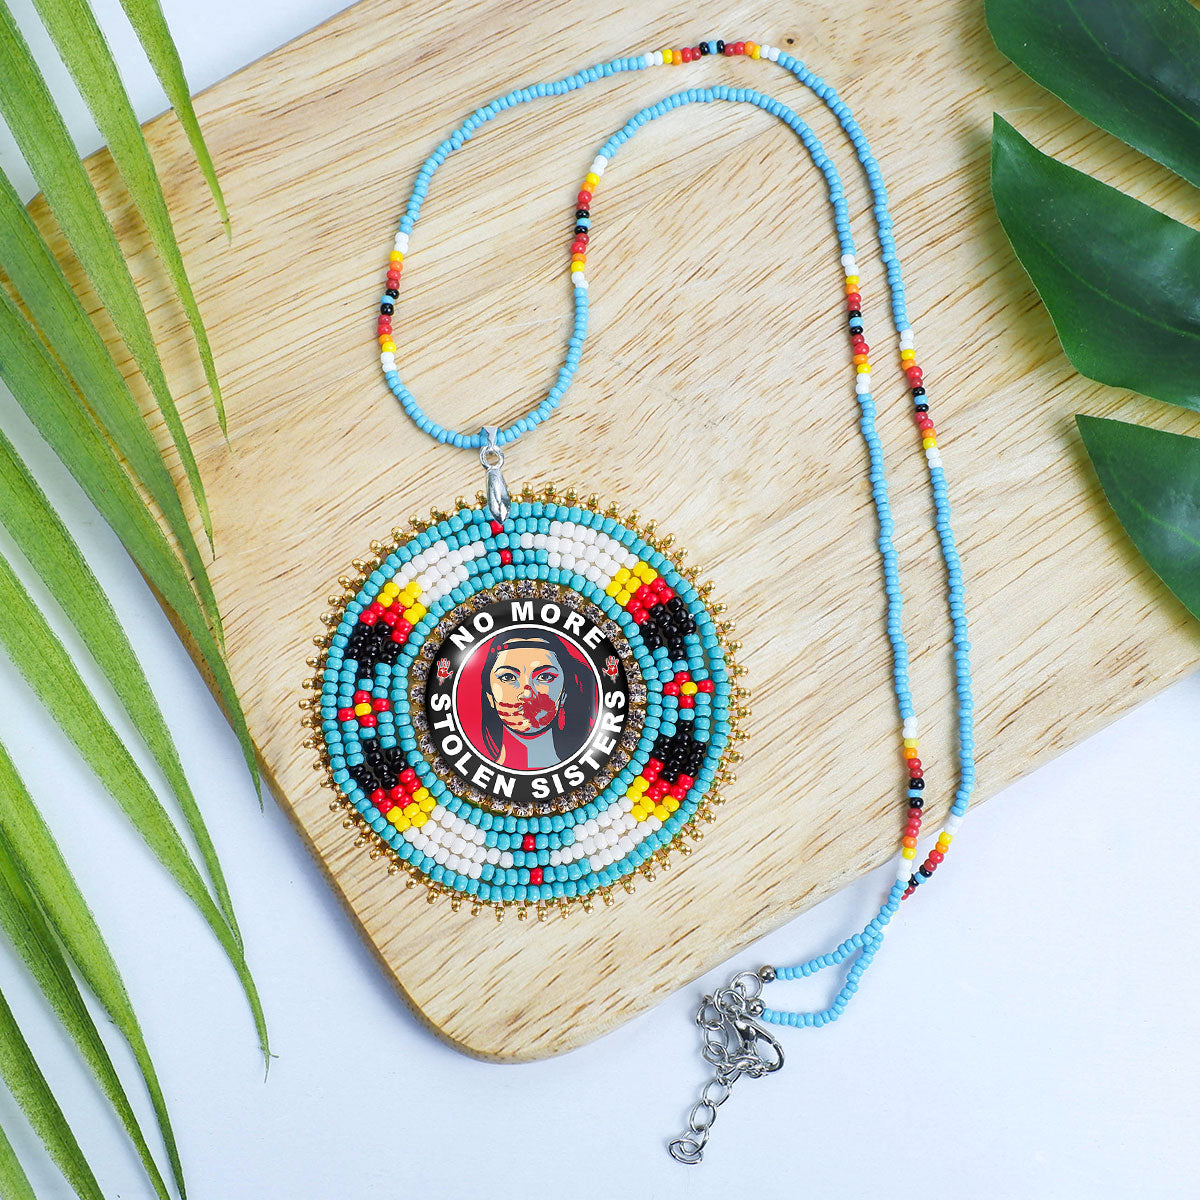 SALE 50% OFF - No More Stolen Sister Feathers Handmade Beaded Wire Necklace Pendant Unisex With Native American Style